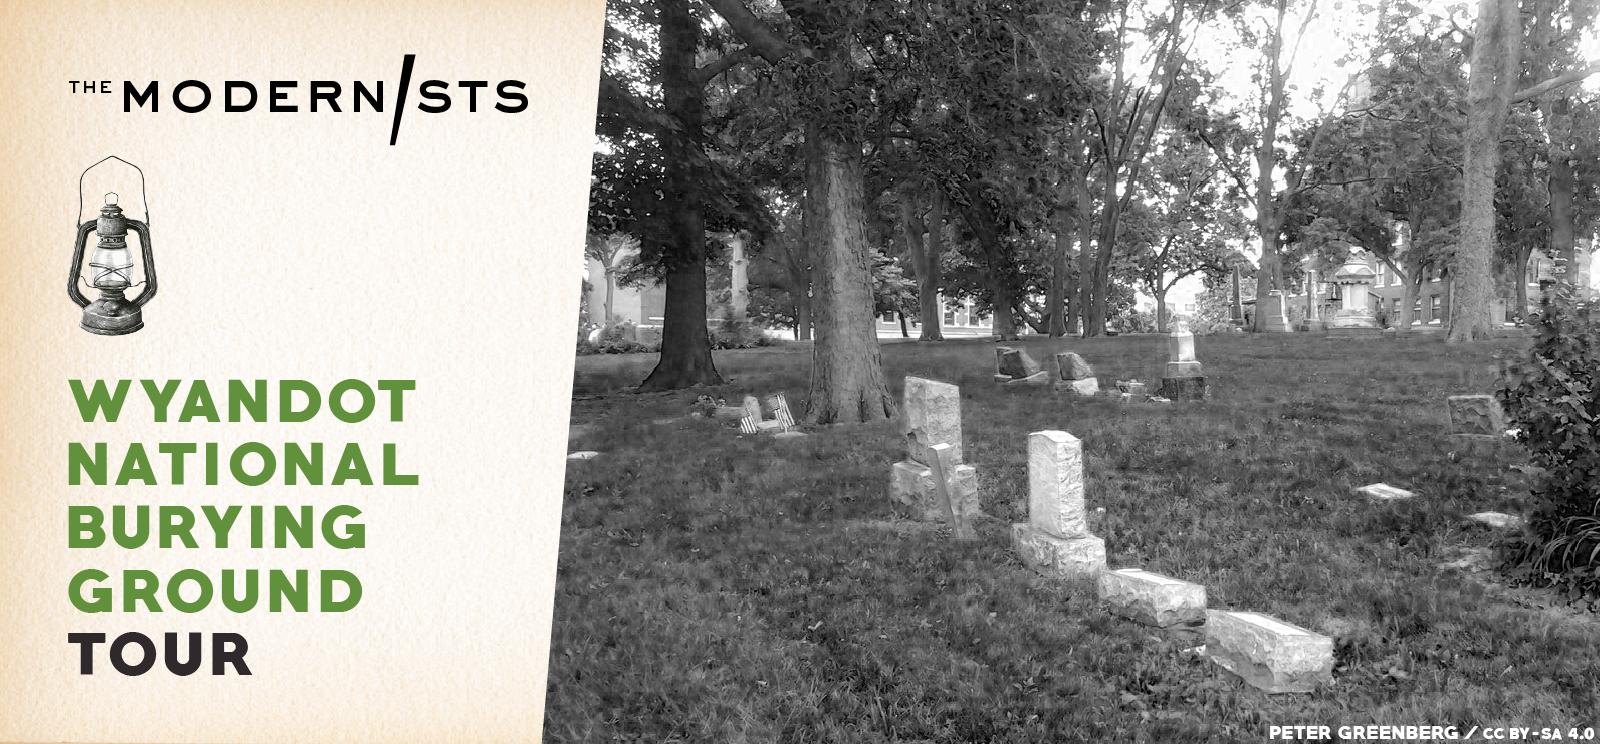 Black and white photograph of a grassy cemetery. Text: The Modernists / Wyanodot National Burying Ground Tour